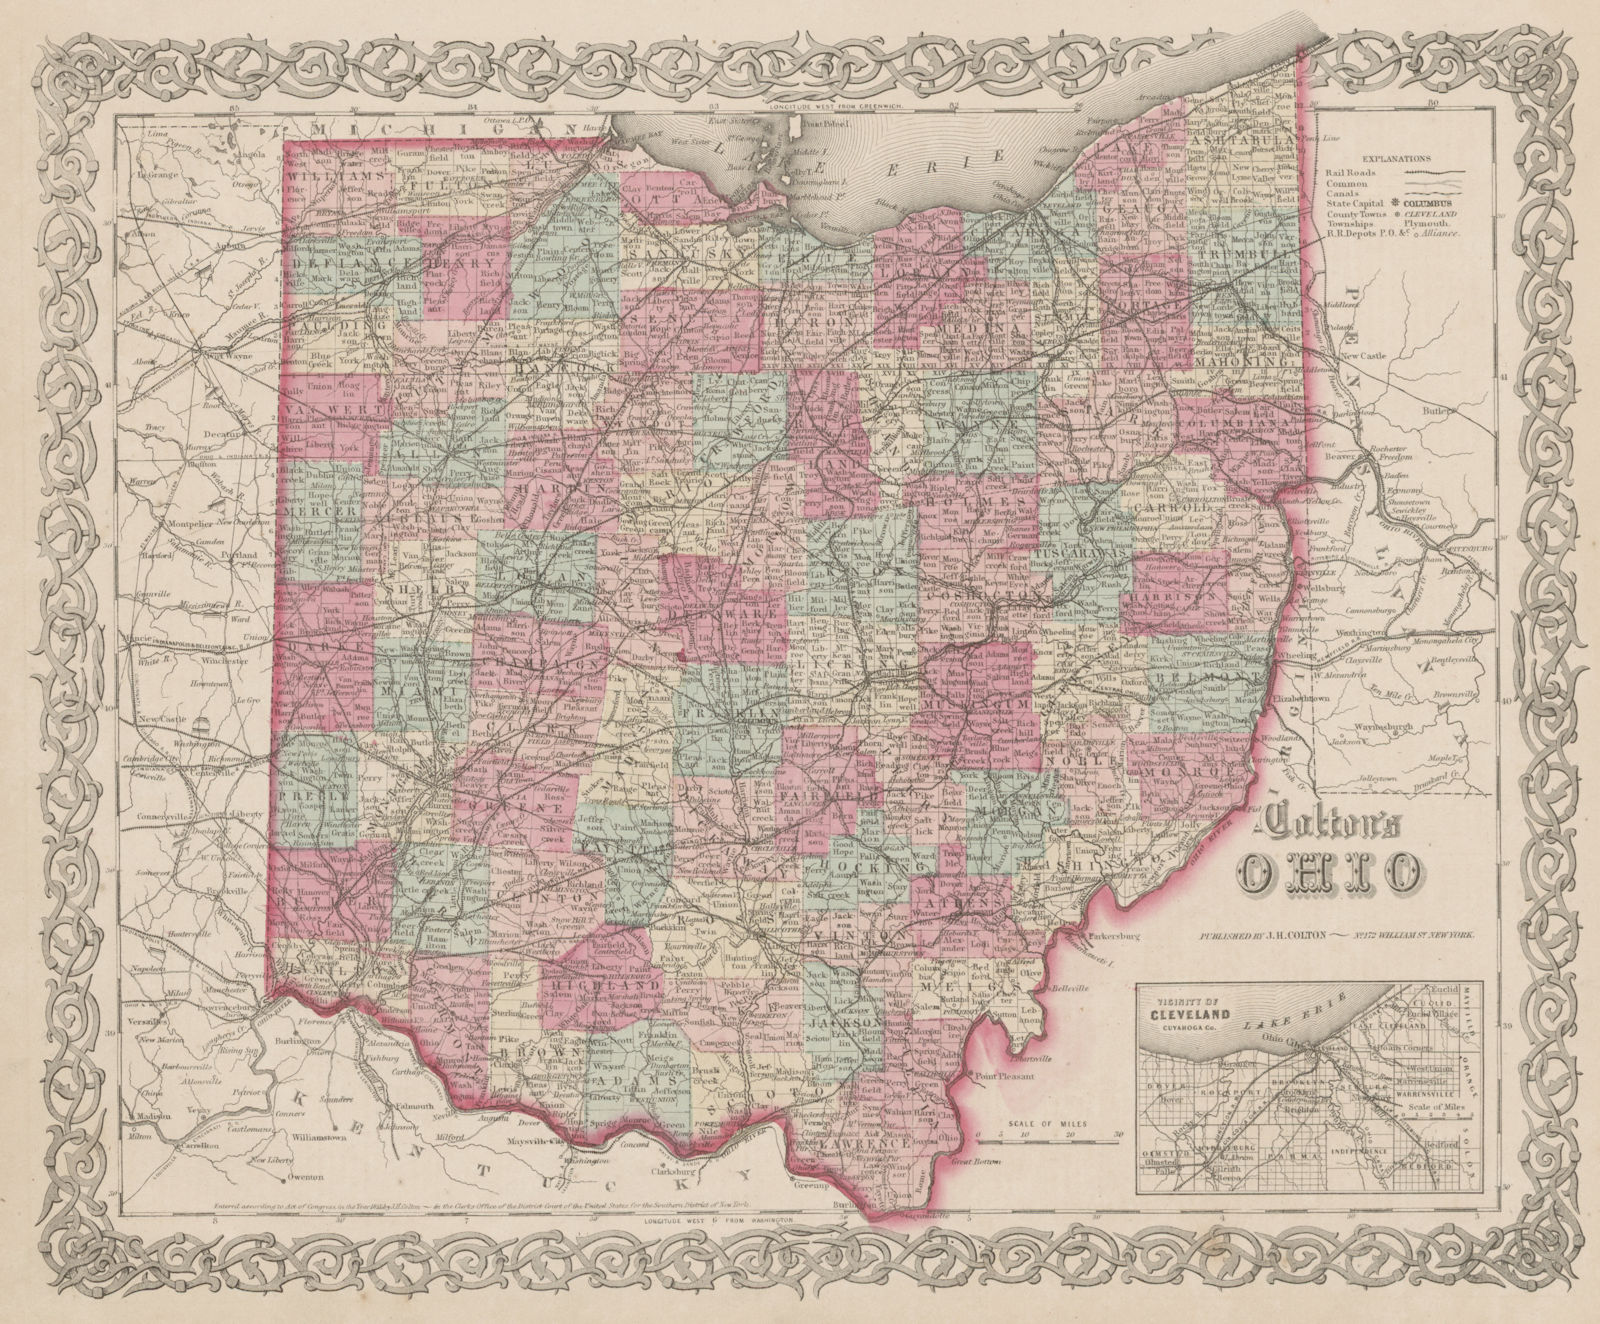 Associate Product "Colton's Ohio". Decorative antique US state map 1863 old chart